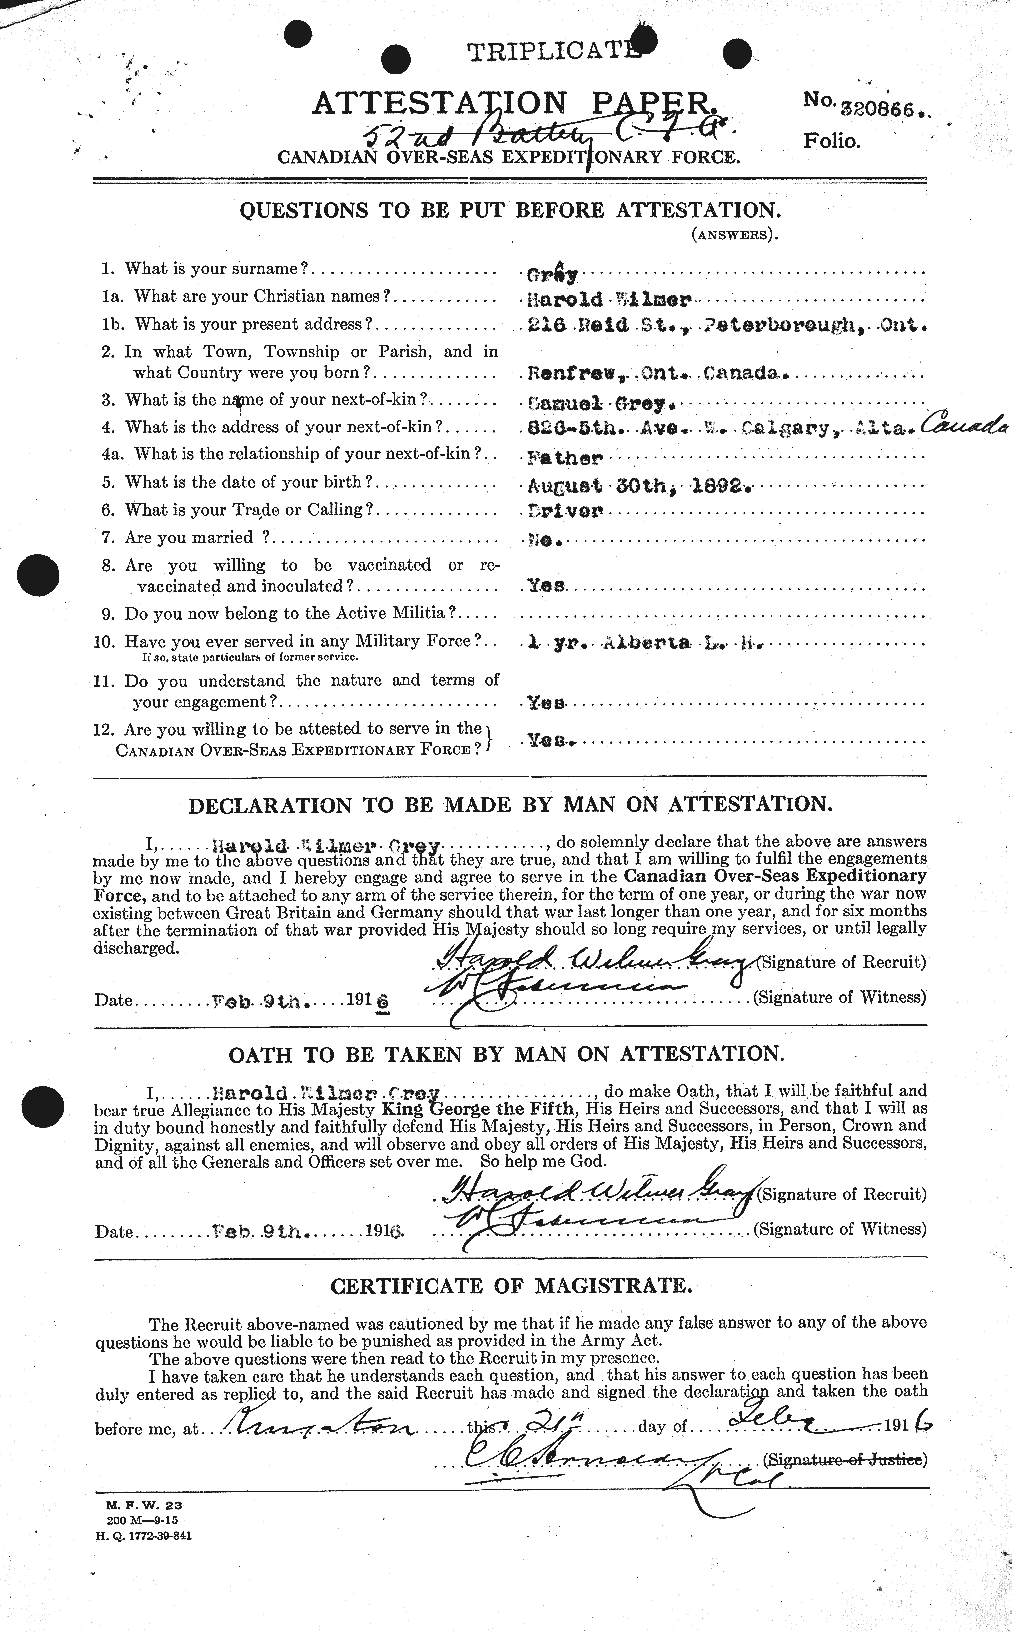 Personnel Records of the First World War - CEF 361640a